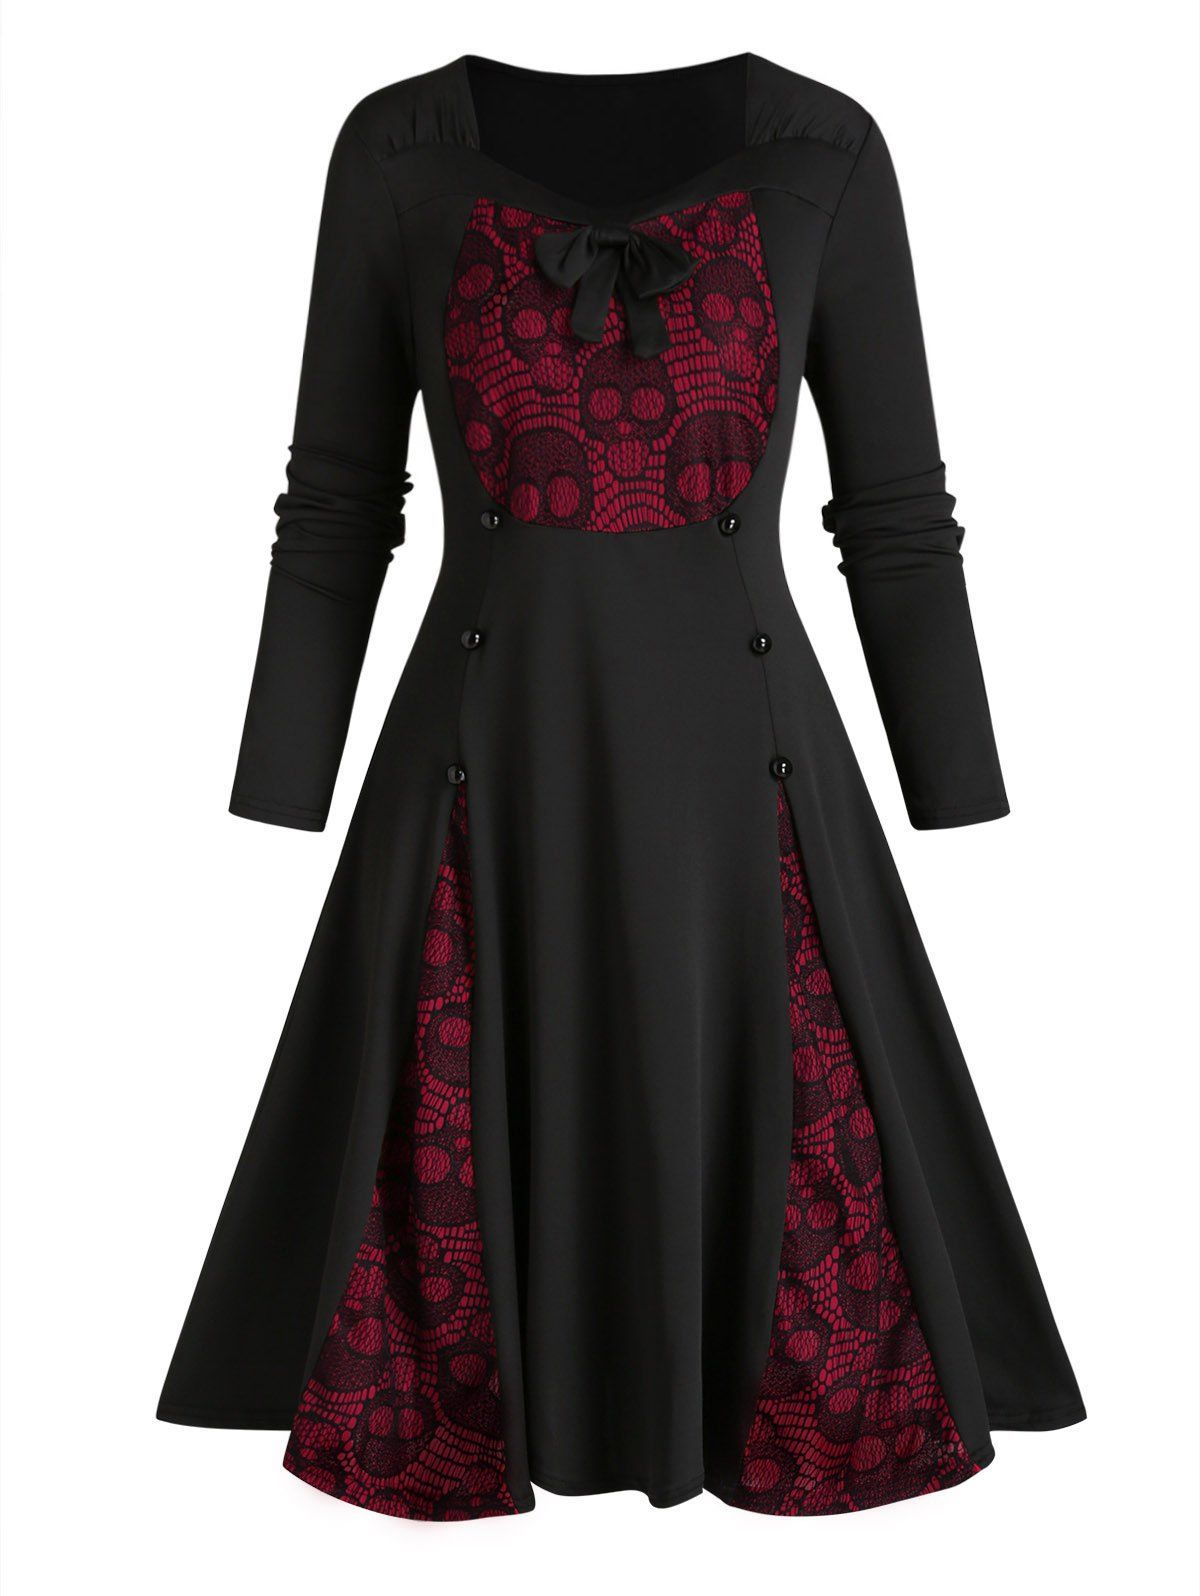 Gothic Dress Skull Lace Bowknot Mock Button Long Sleeve Sweetheart Neck A Line Mini Dress - RED M